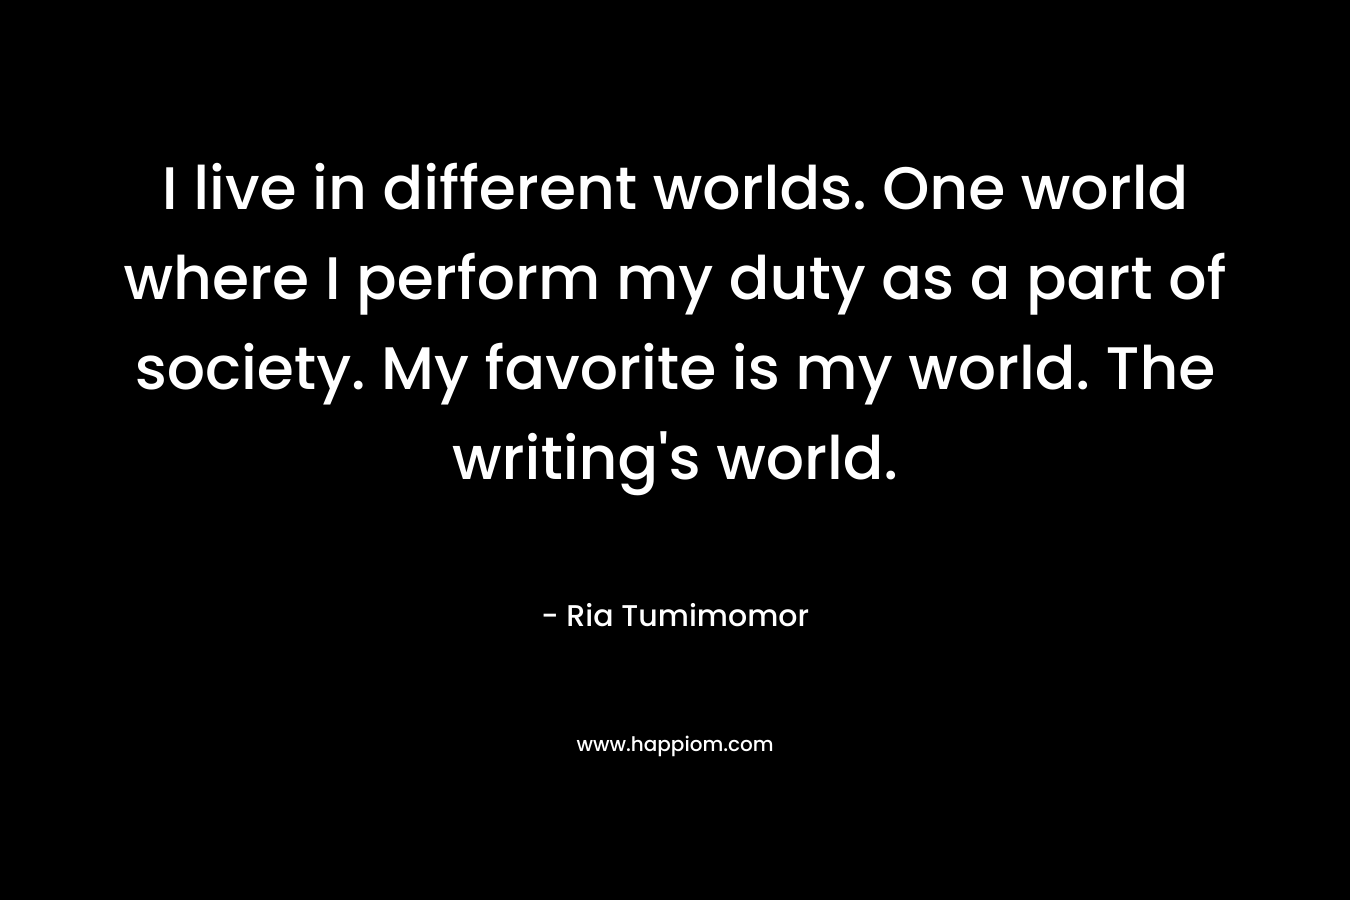 I live in different worlds. One world where I perform my duty as a part of society. My favorite is my world. The writing's world.